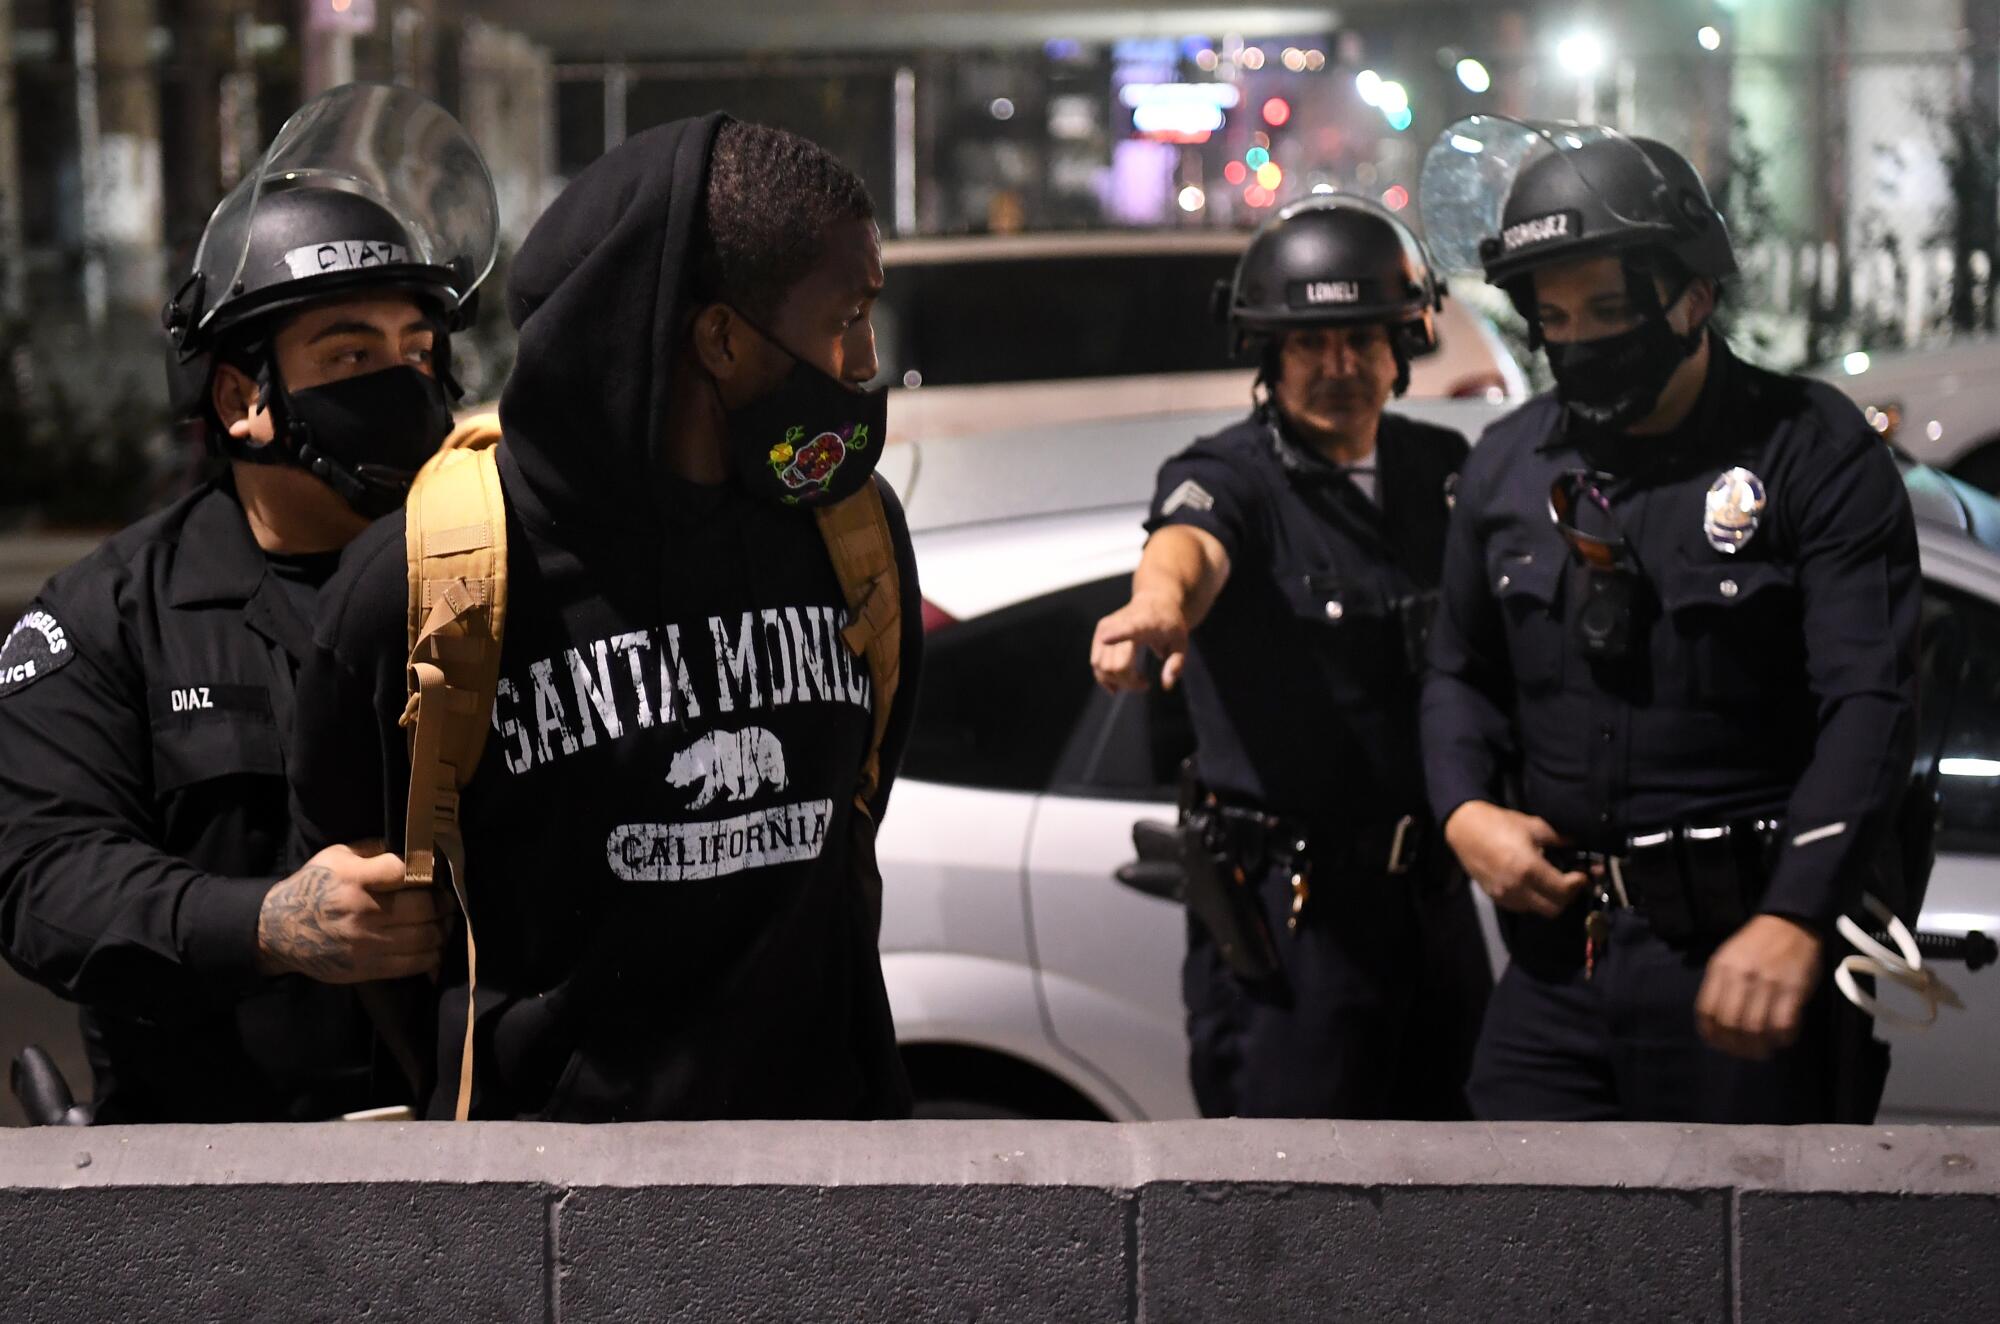 Police detain protesters near 18th and Figueroa streets in downtown Los Angeles on Tuesday night.